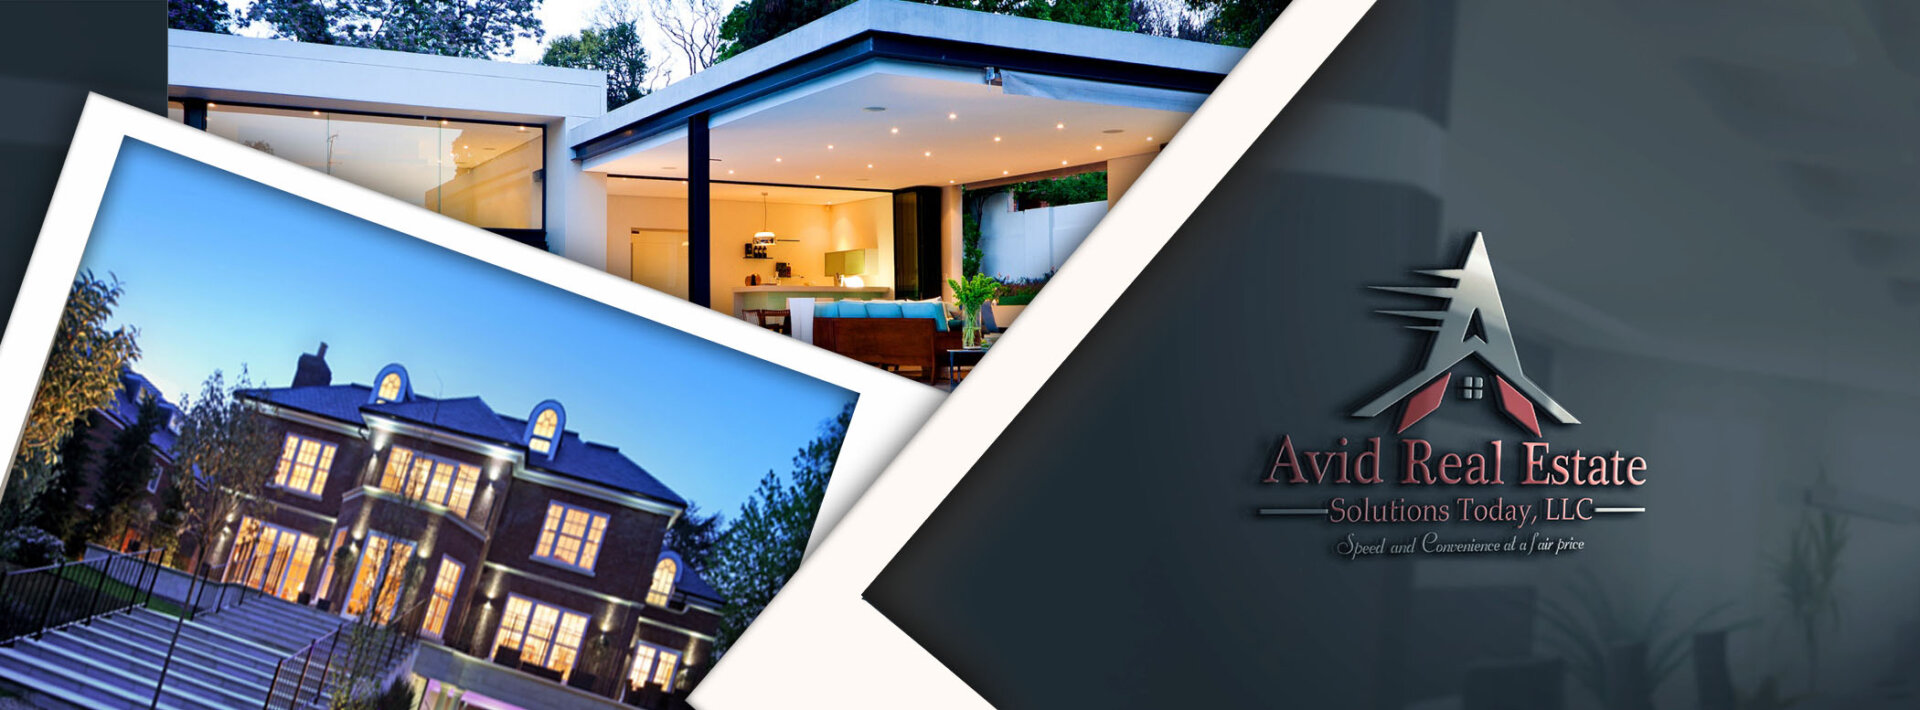 Avid Real Estate Solutions Today Facebook Cover